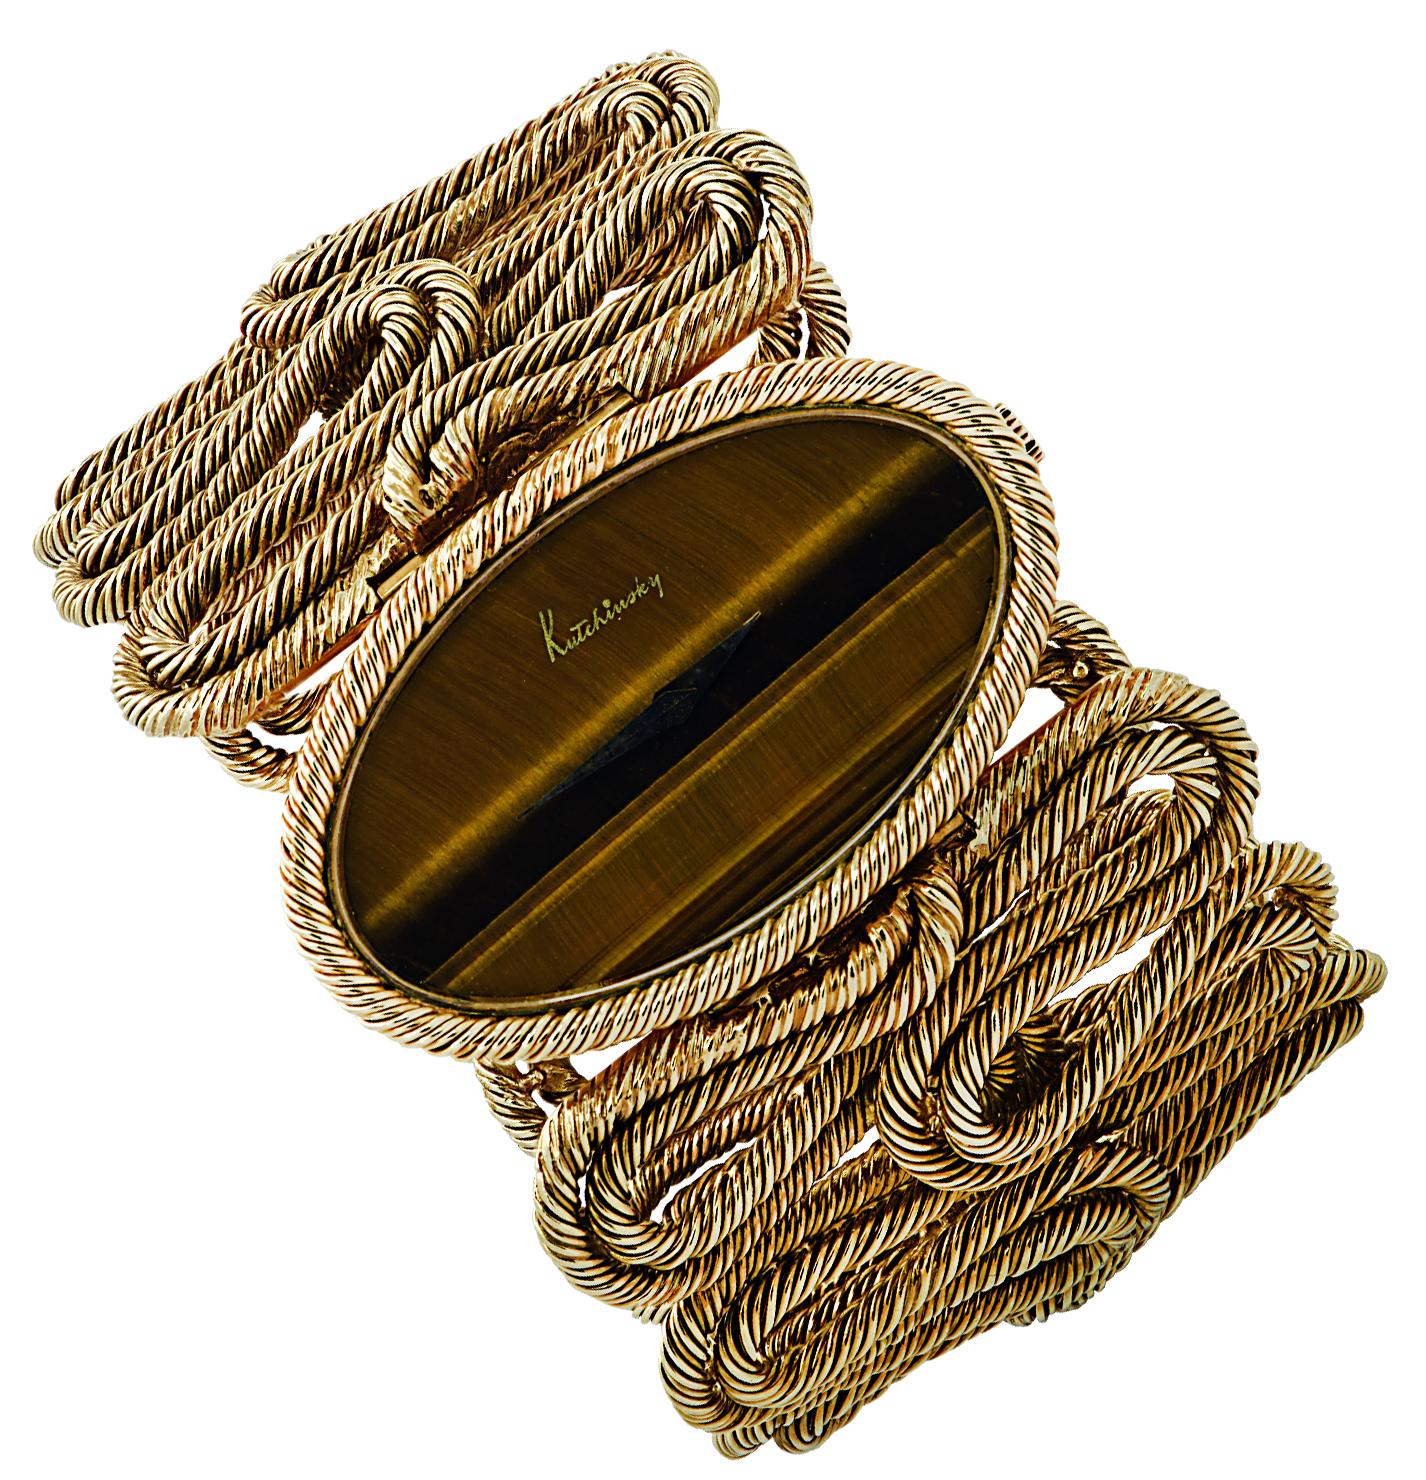 Stunning ladies’ Kutchinsky manual wind cuff wristwatch circa 1970, crafted in 18 karat yellow gold. The Tigers’ eye oval dial with gold hands is framed in twisted yellow gold rope, which swirls around the wrist embracing it in opulence. The case of